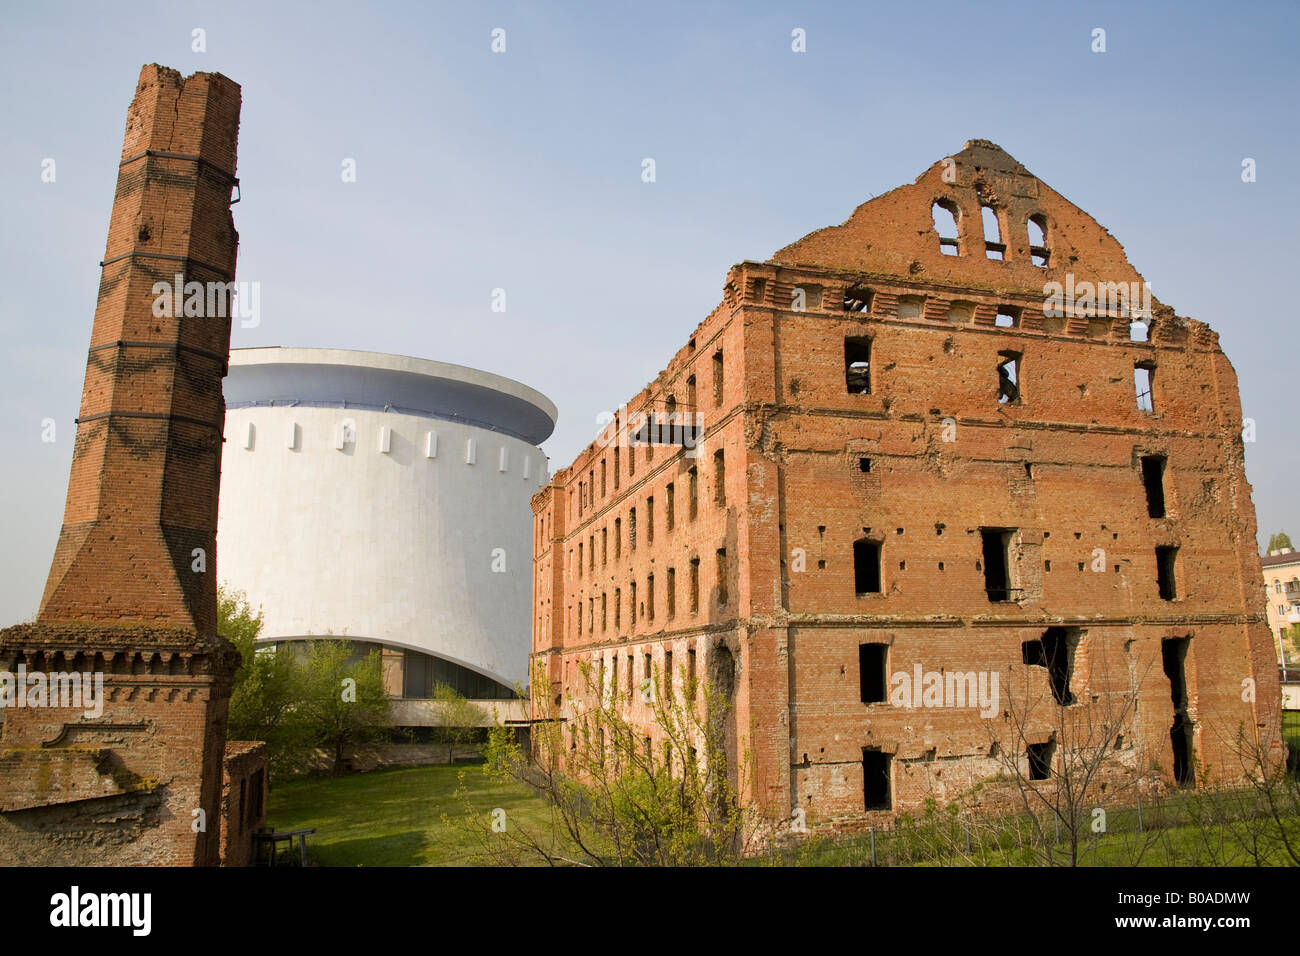 Badly damaged Mill from the Siege of Stalingrad and panoramic museum, Volgograd, Russia, Russian Federation Stock Photo